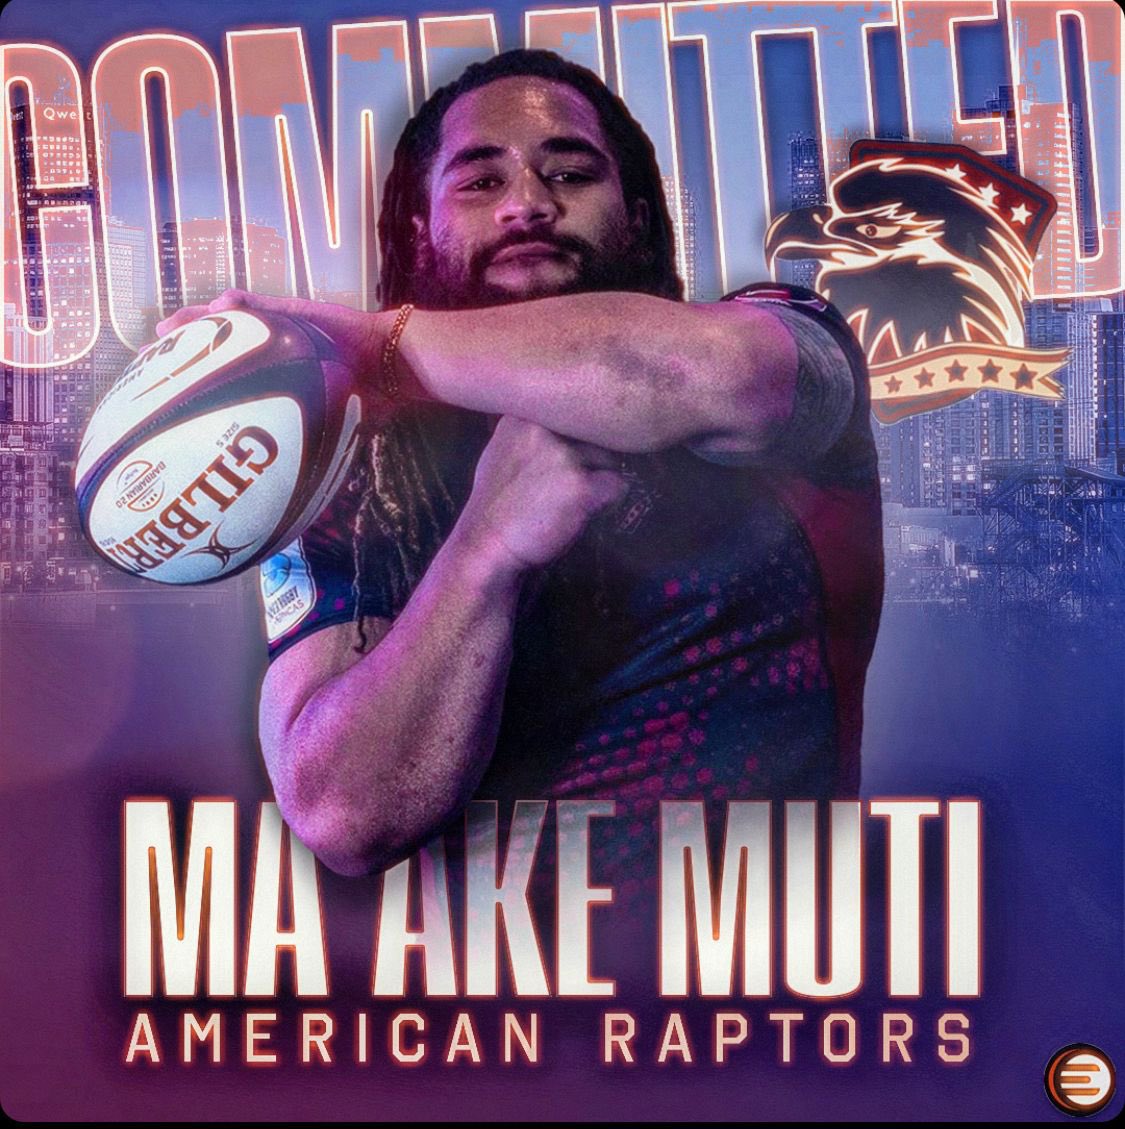 Delighted to announce prop forward @maake_muti94 has committed to the @americanraptorsrugby @superrugbyamericas  📄✍🏼

The road to success is a long and hard one full of sacrifice it’s impossible to avoid embrace the challenge and enjoy the journey.

🇺🇸🏉🦅

#MakeItHappen